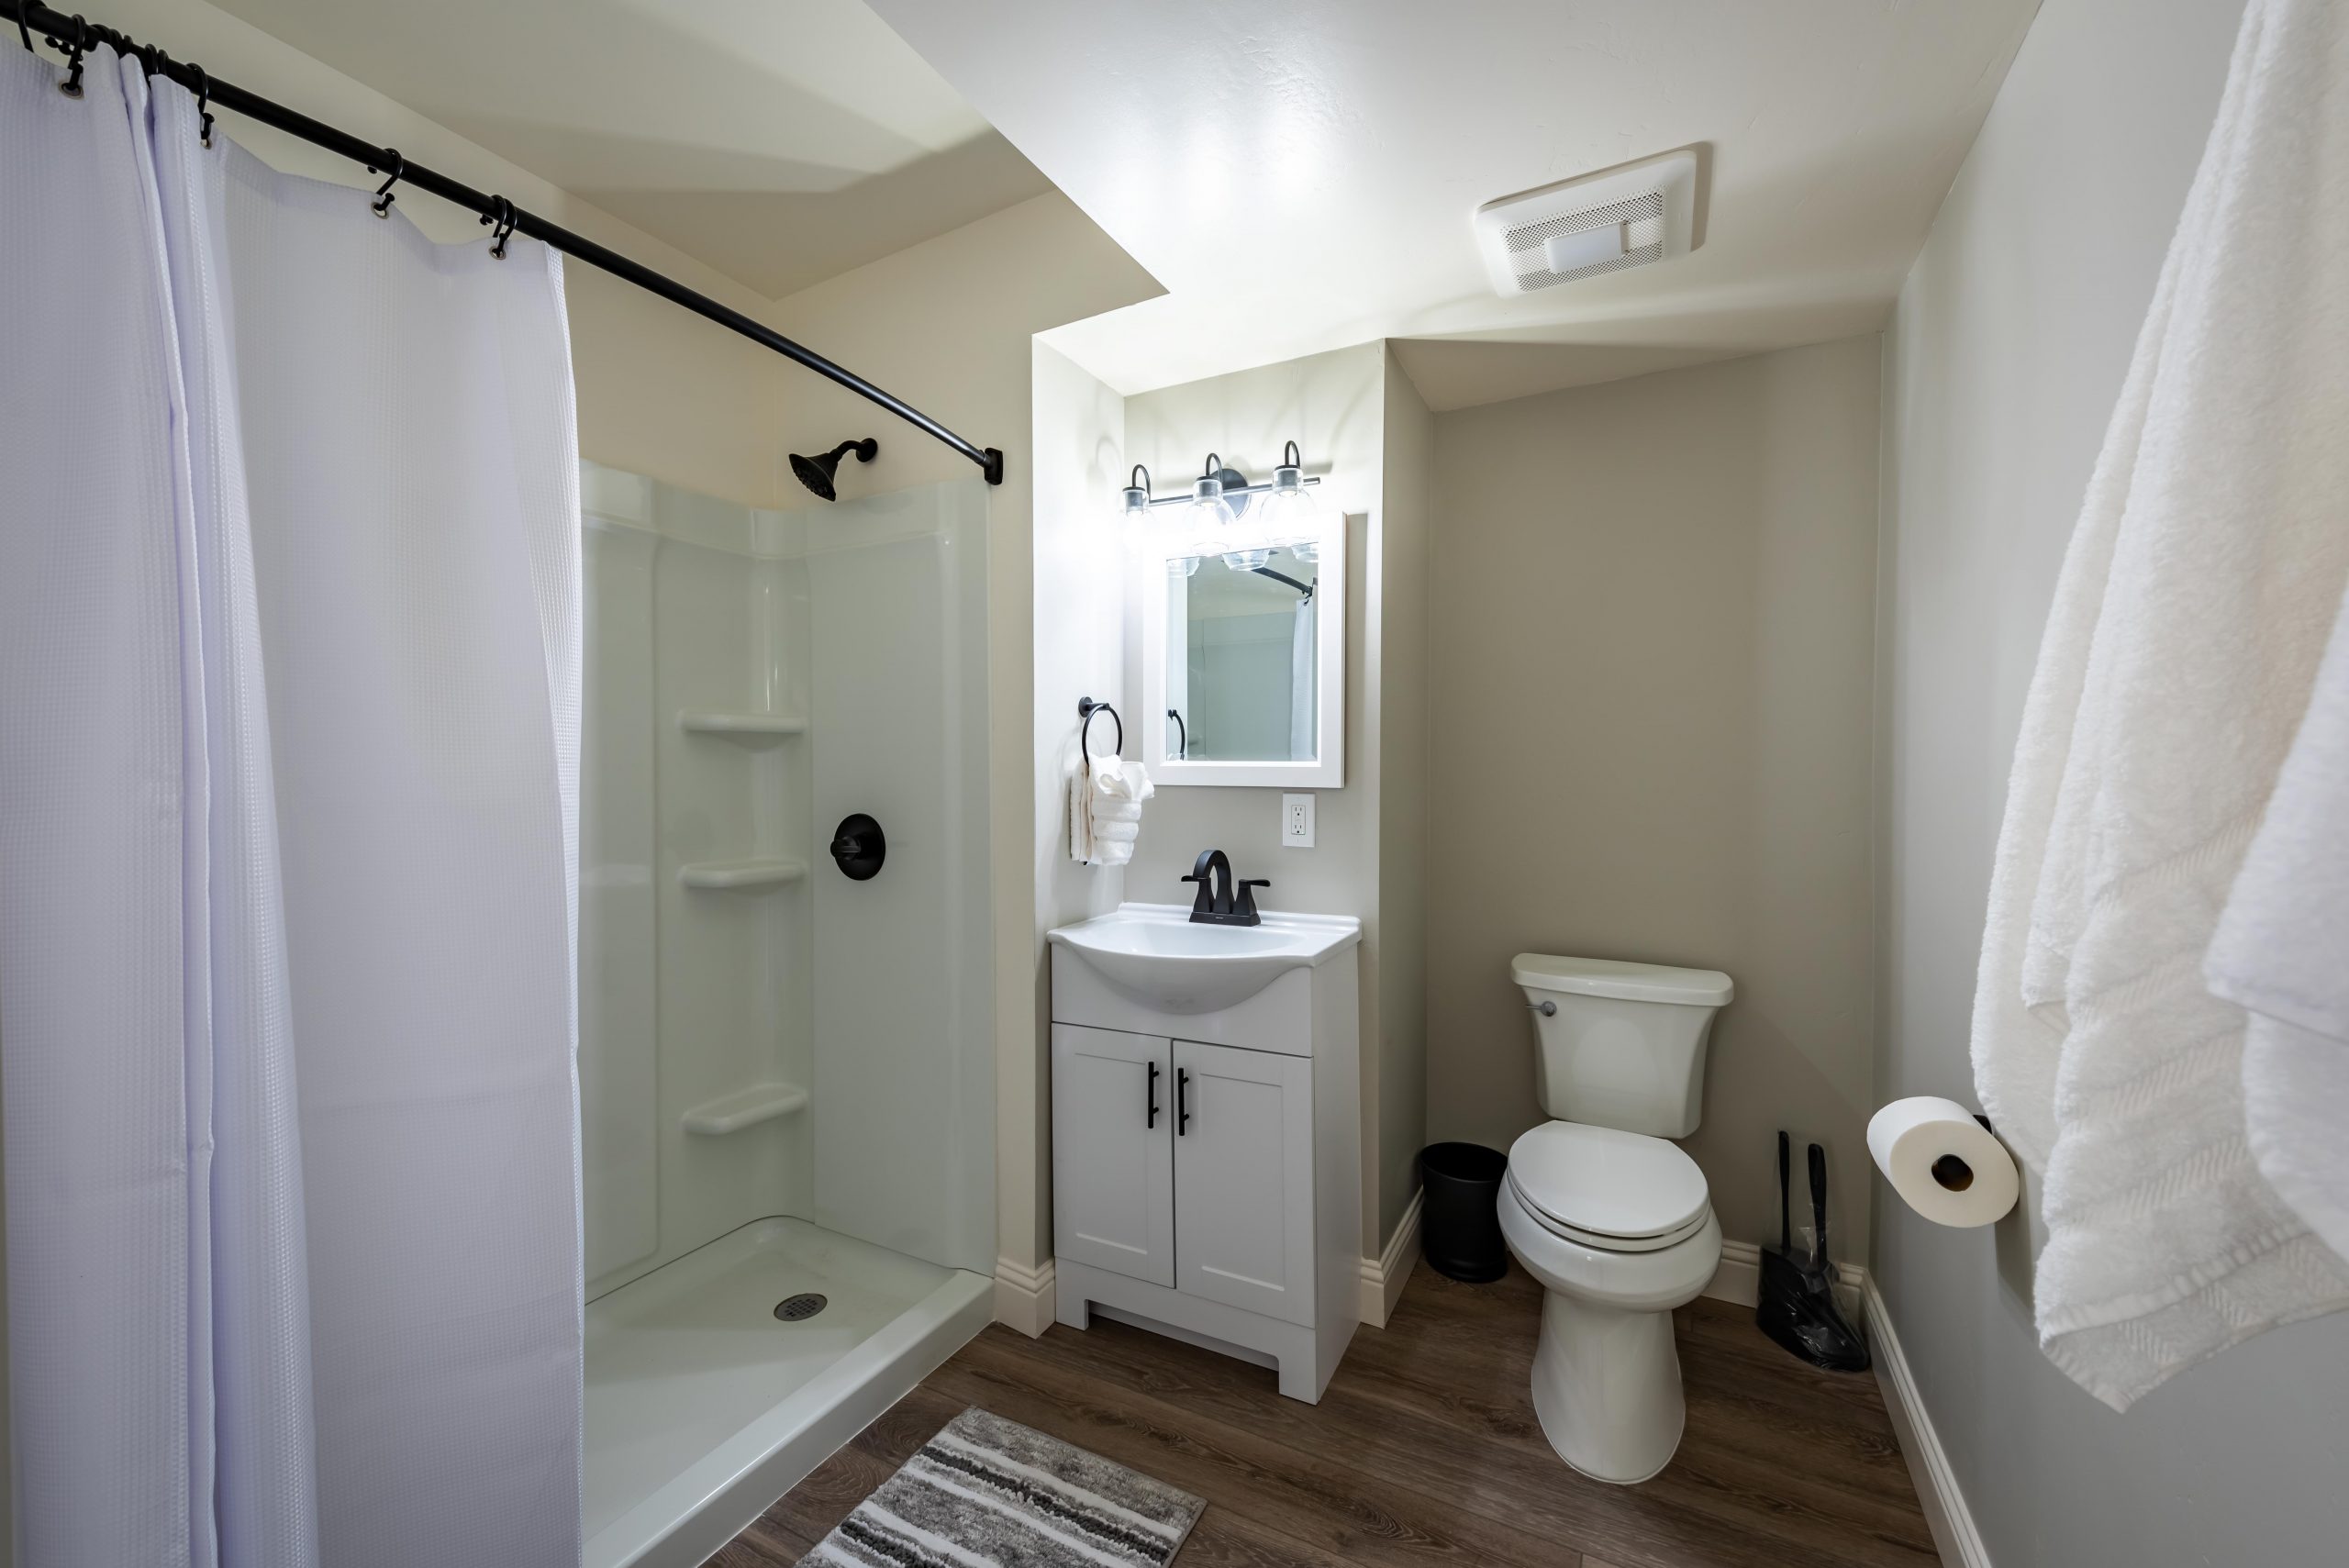 Bathroom with standing shower